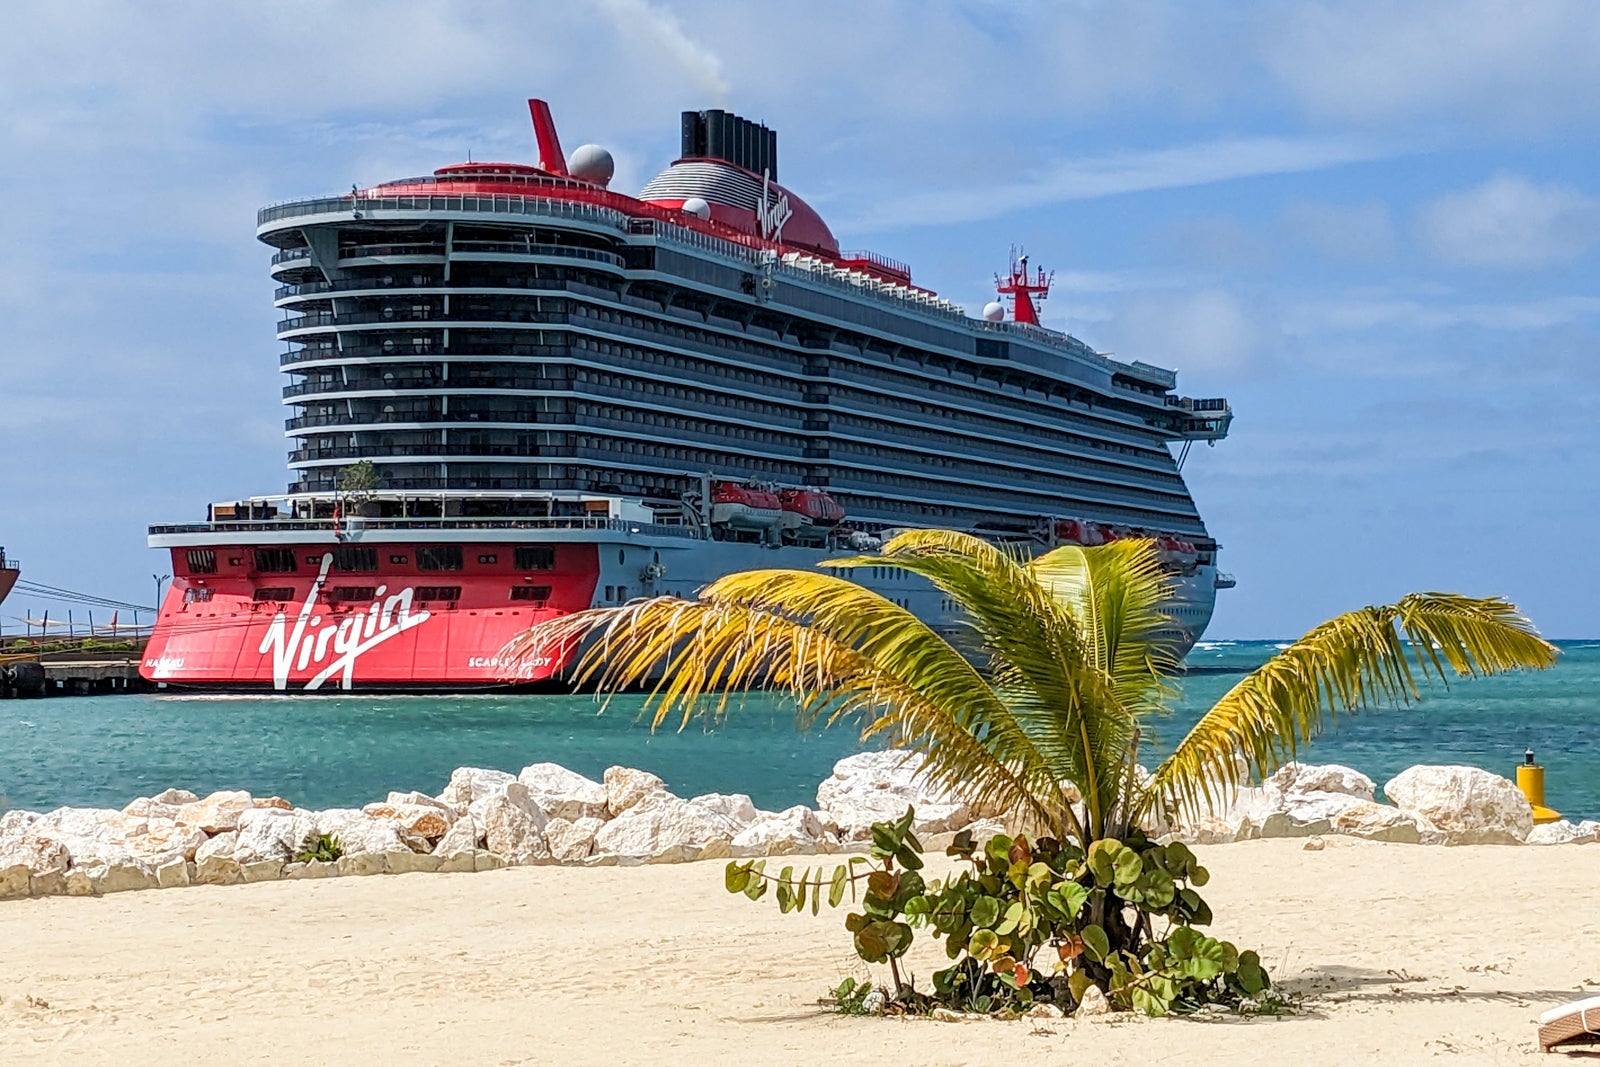 Scarlet Lady cruise ship docked with small palm tree in front